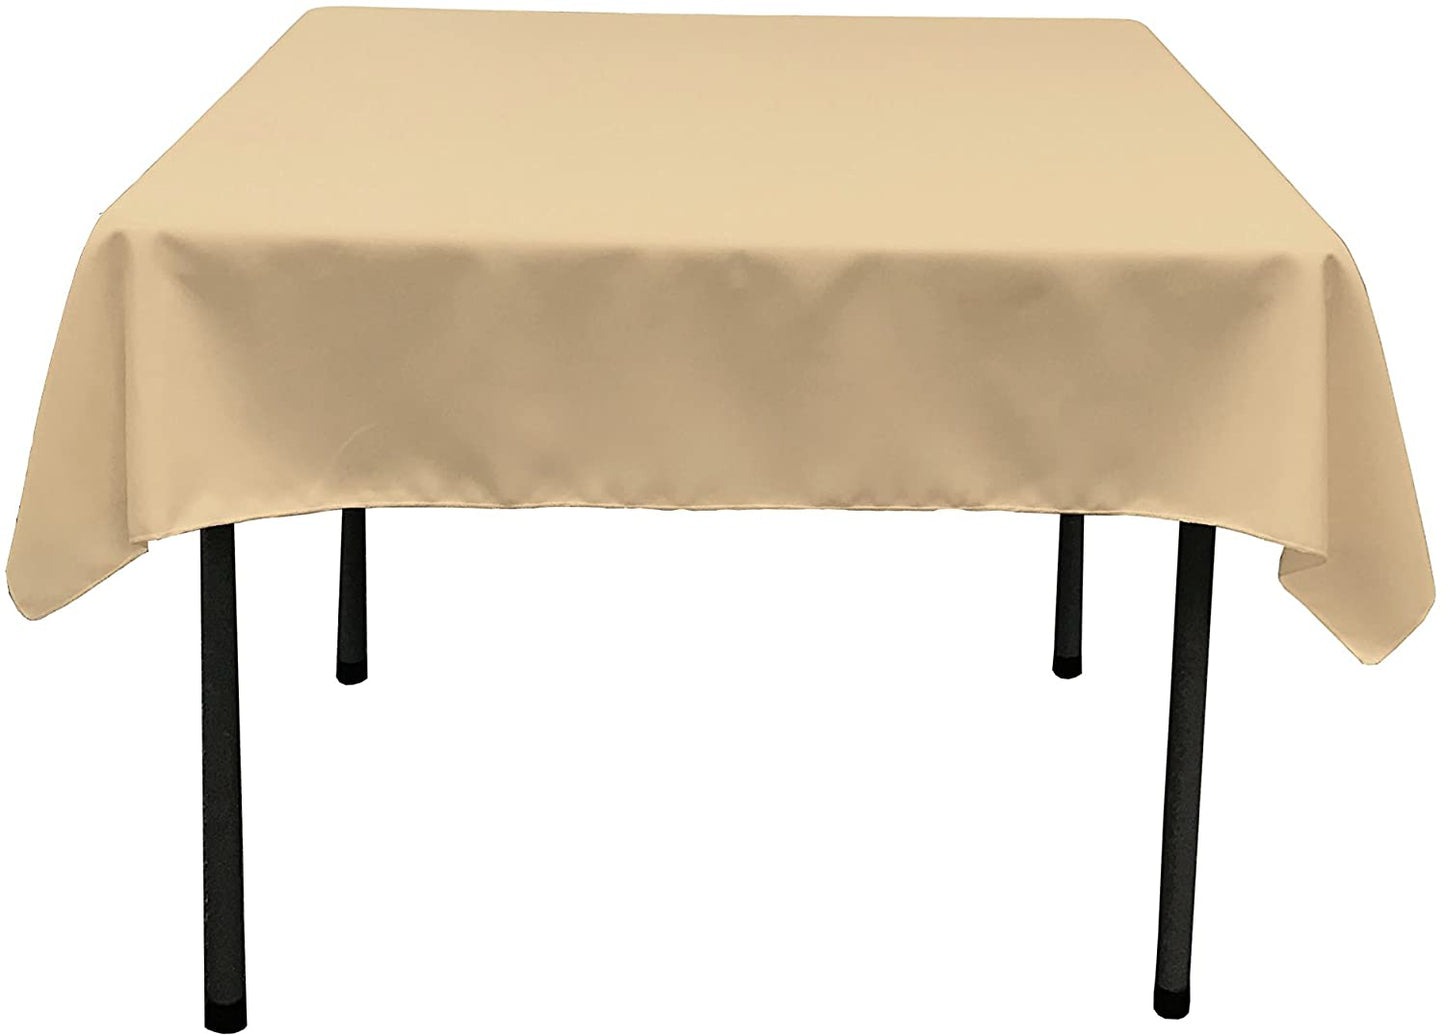 Polyester Poplin Washable Square Tablecloth, Stain and Wrinkle Resistant Table Cover Khaki